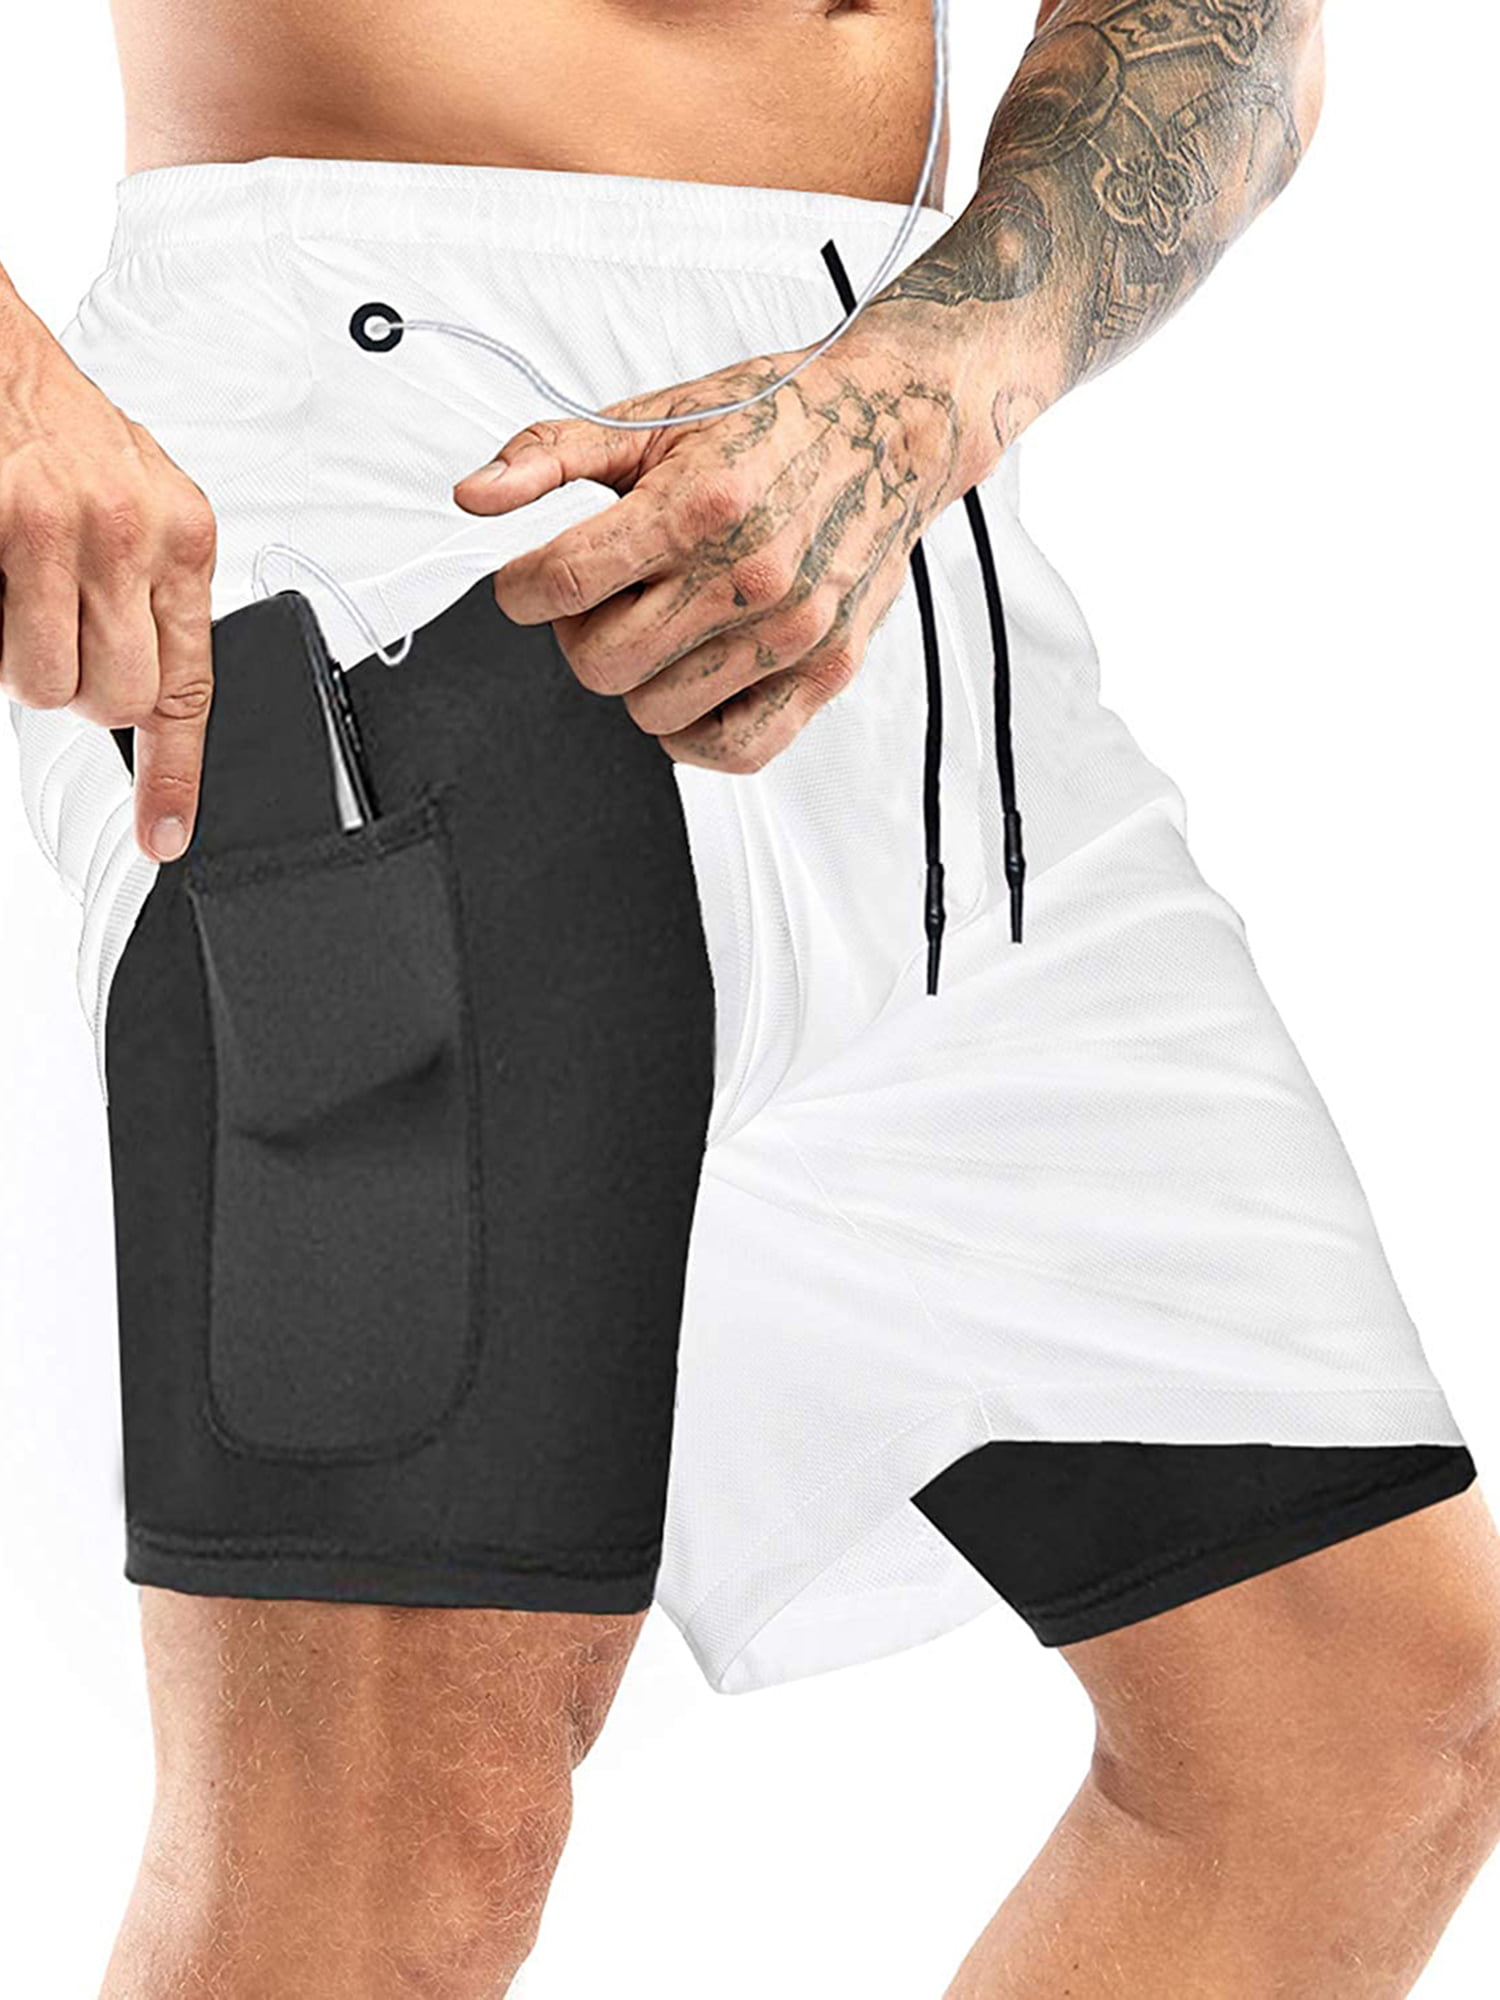 2-in-1 Quick Drying Breathable Lightweight Built-in Compression Liner Athletic Gym Exercise Training Jogging Short Pants with Back Zipper Pocket Men's Workout Running Shorts